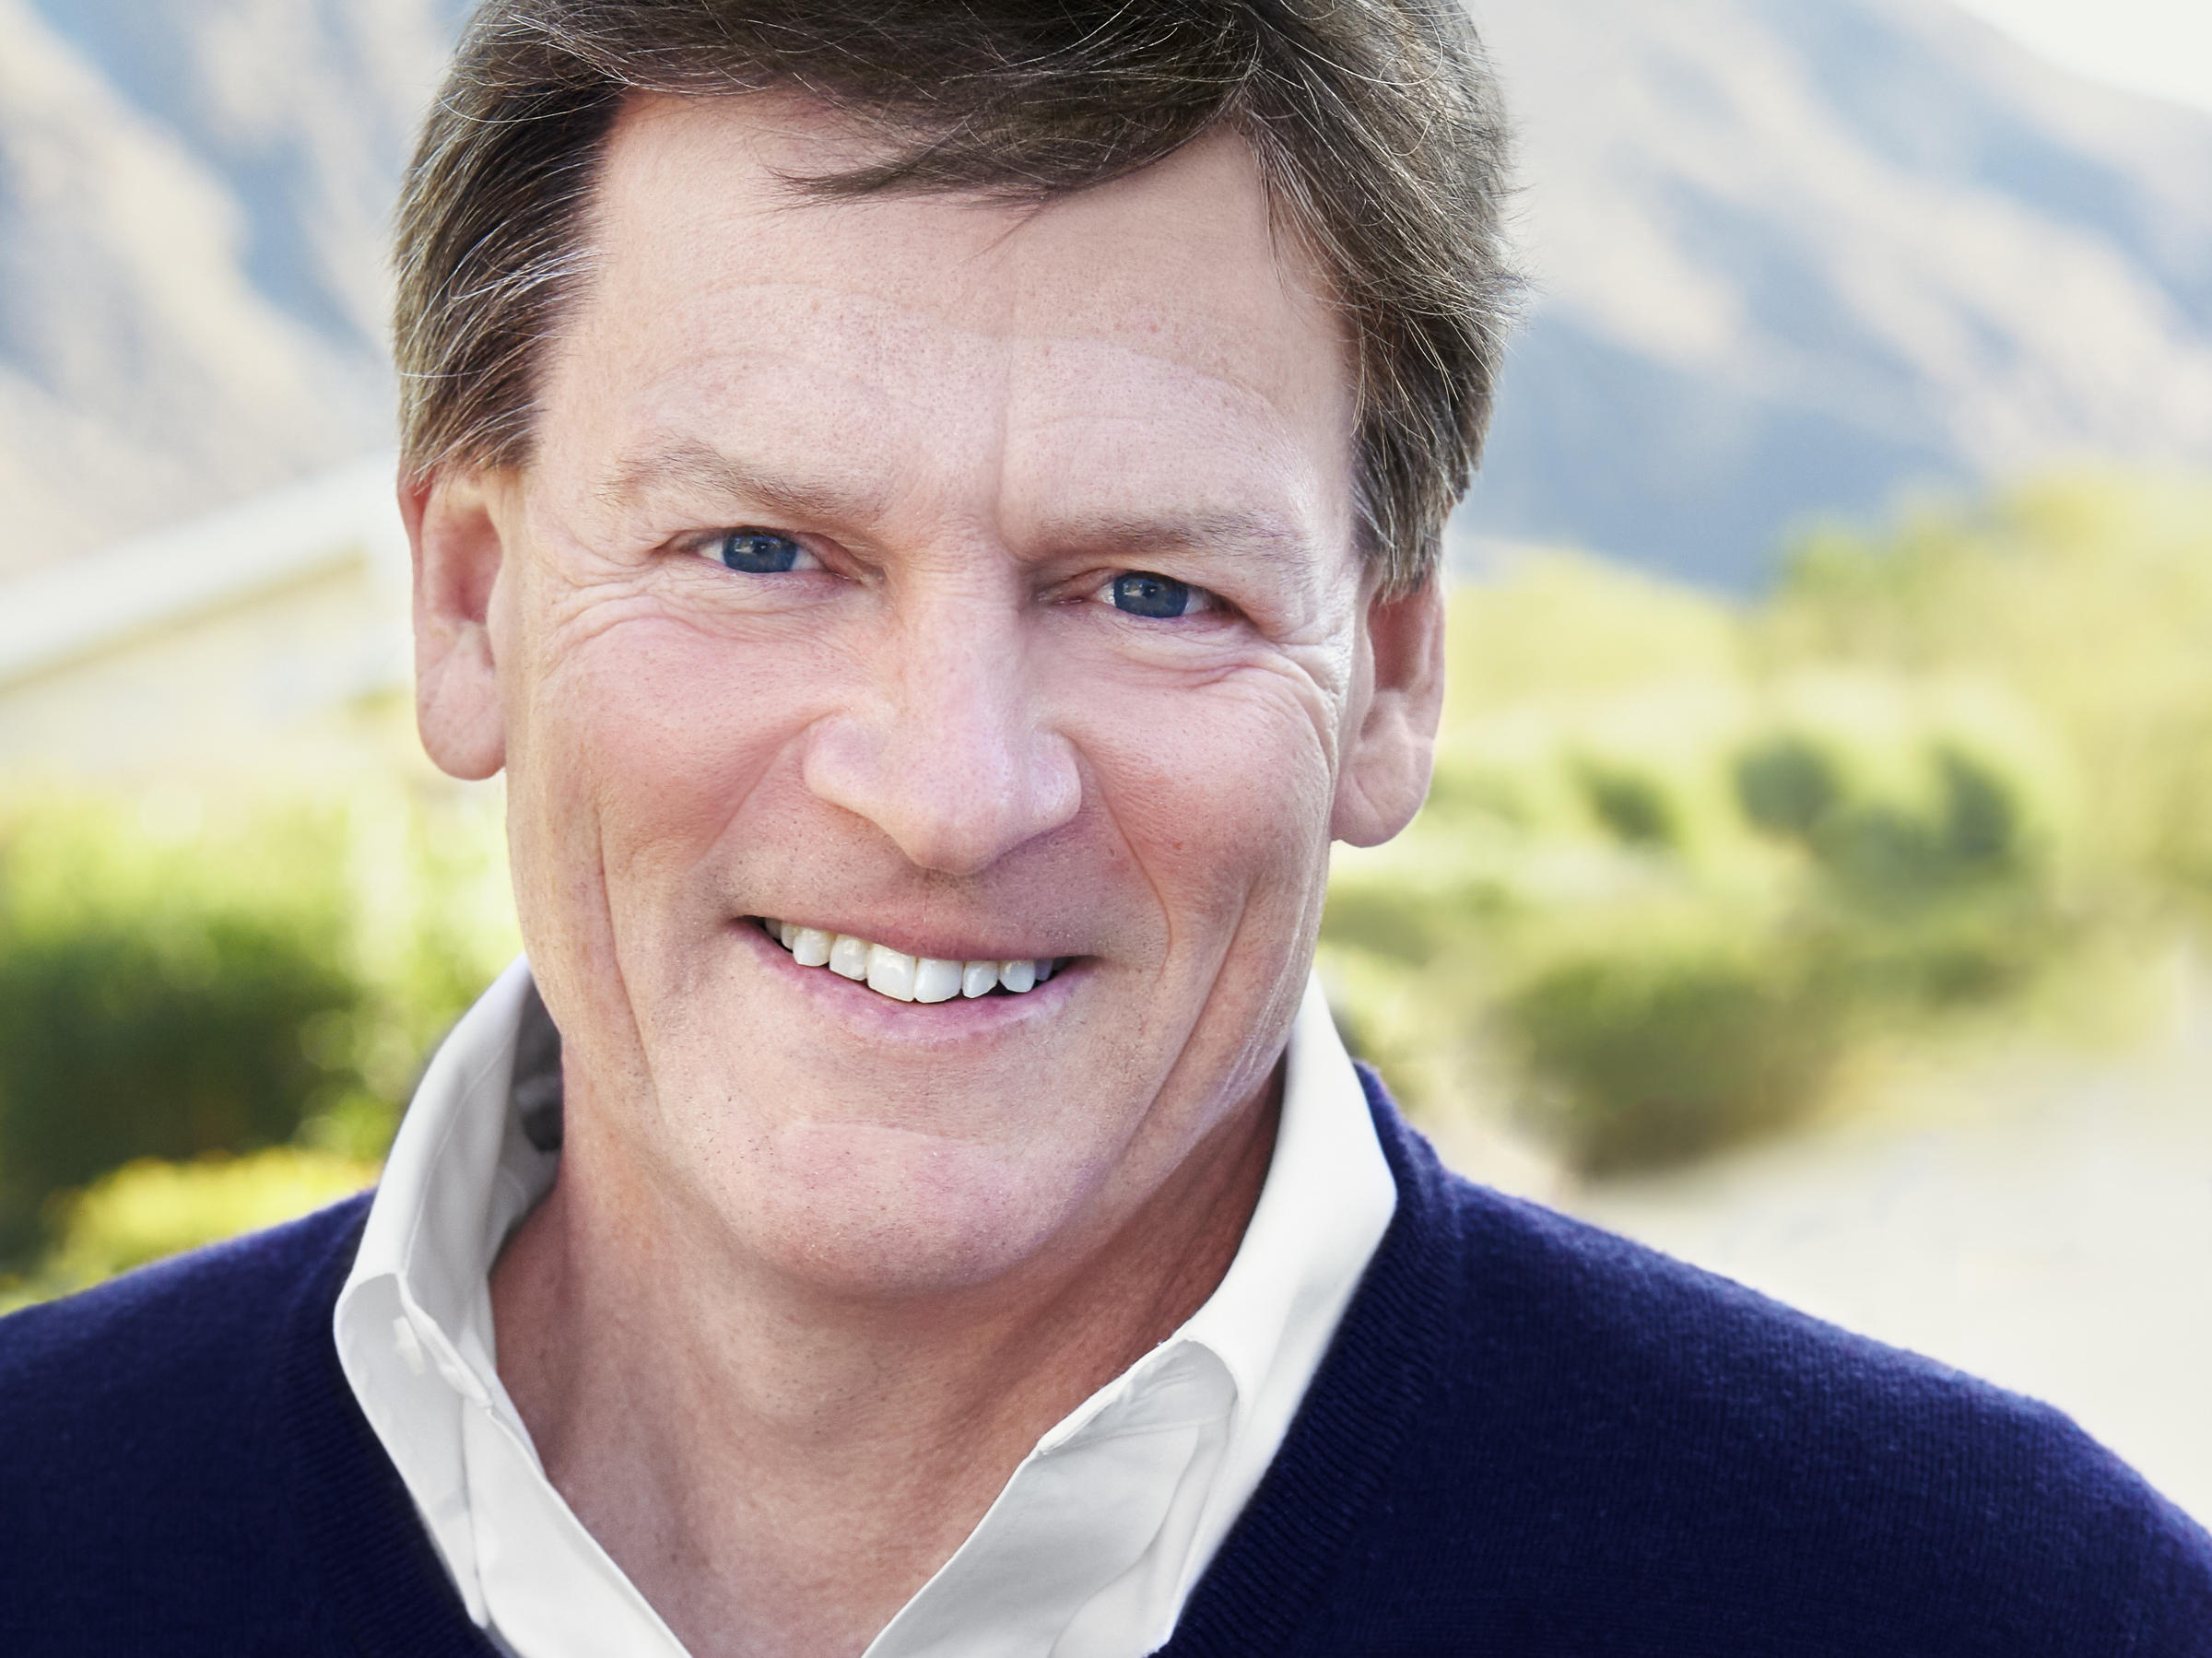 michael lewis new book the undoing project